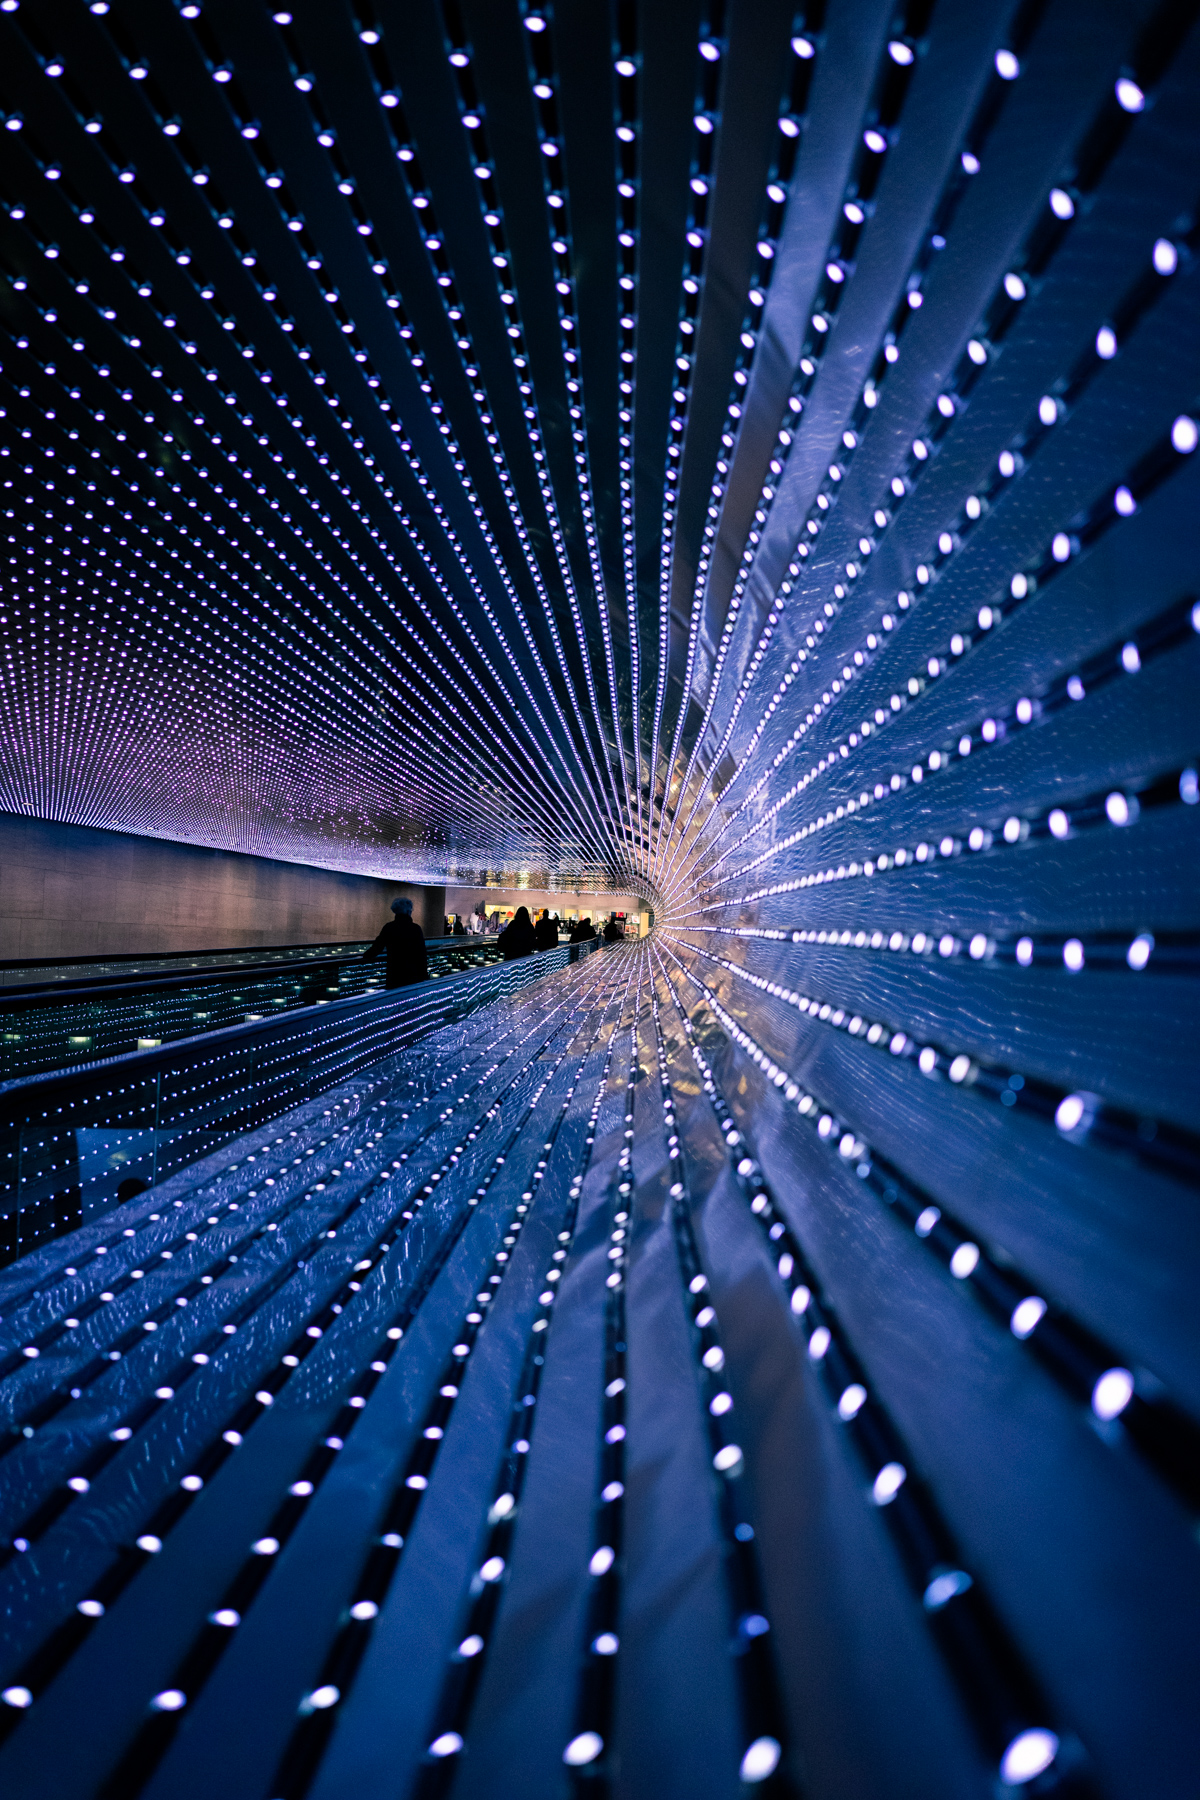 Multiverse LED art installation at the National Gallery …